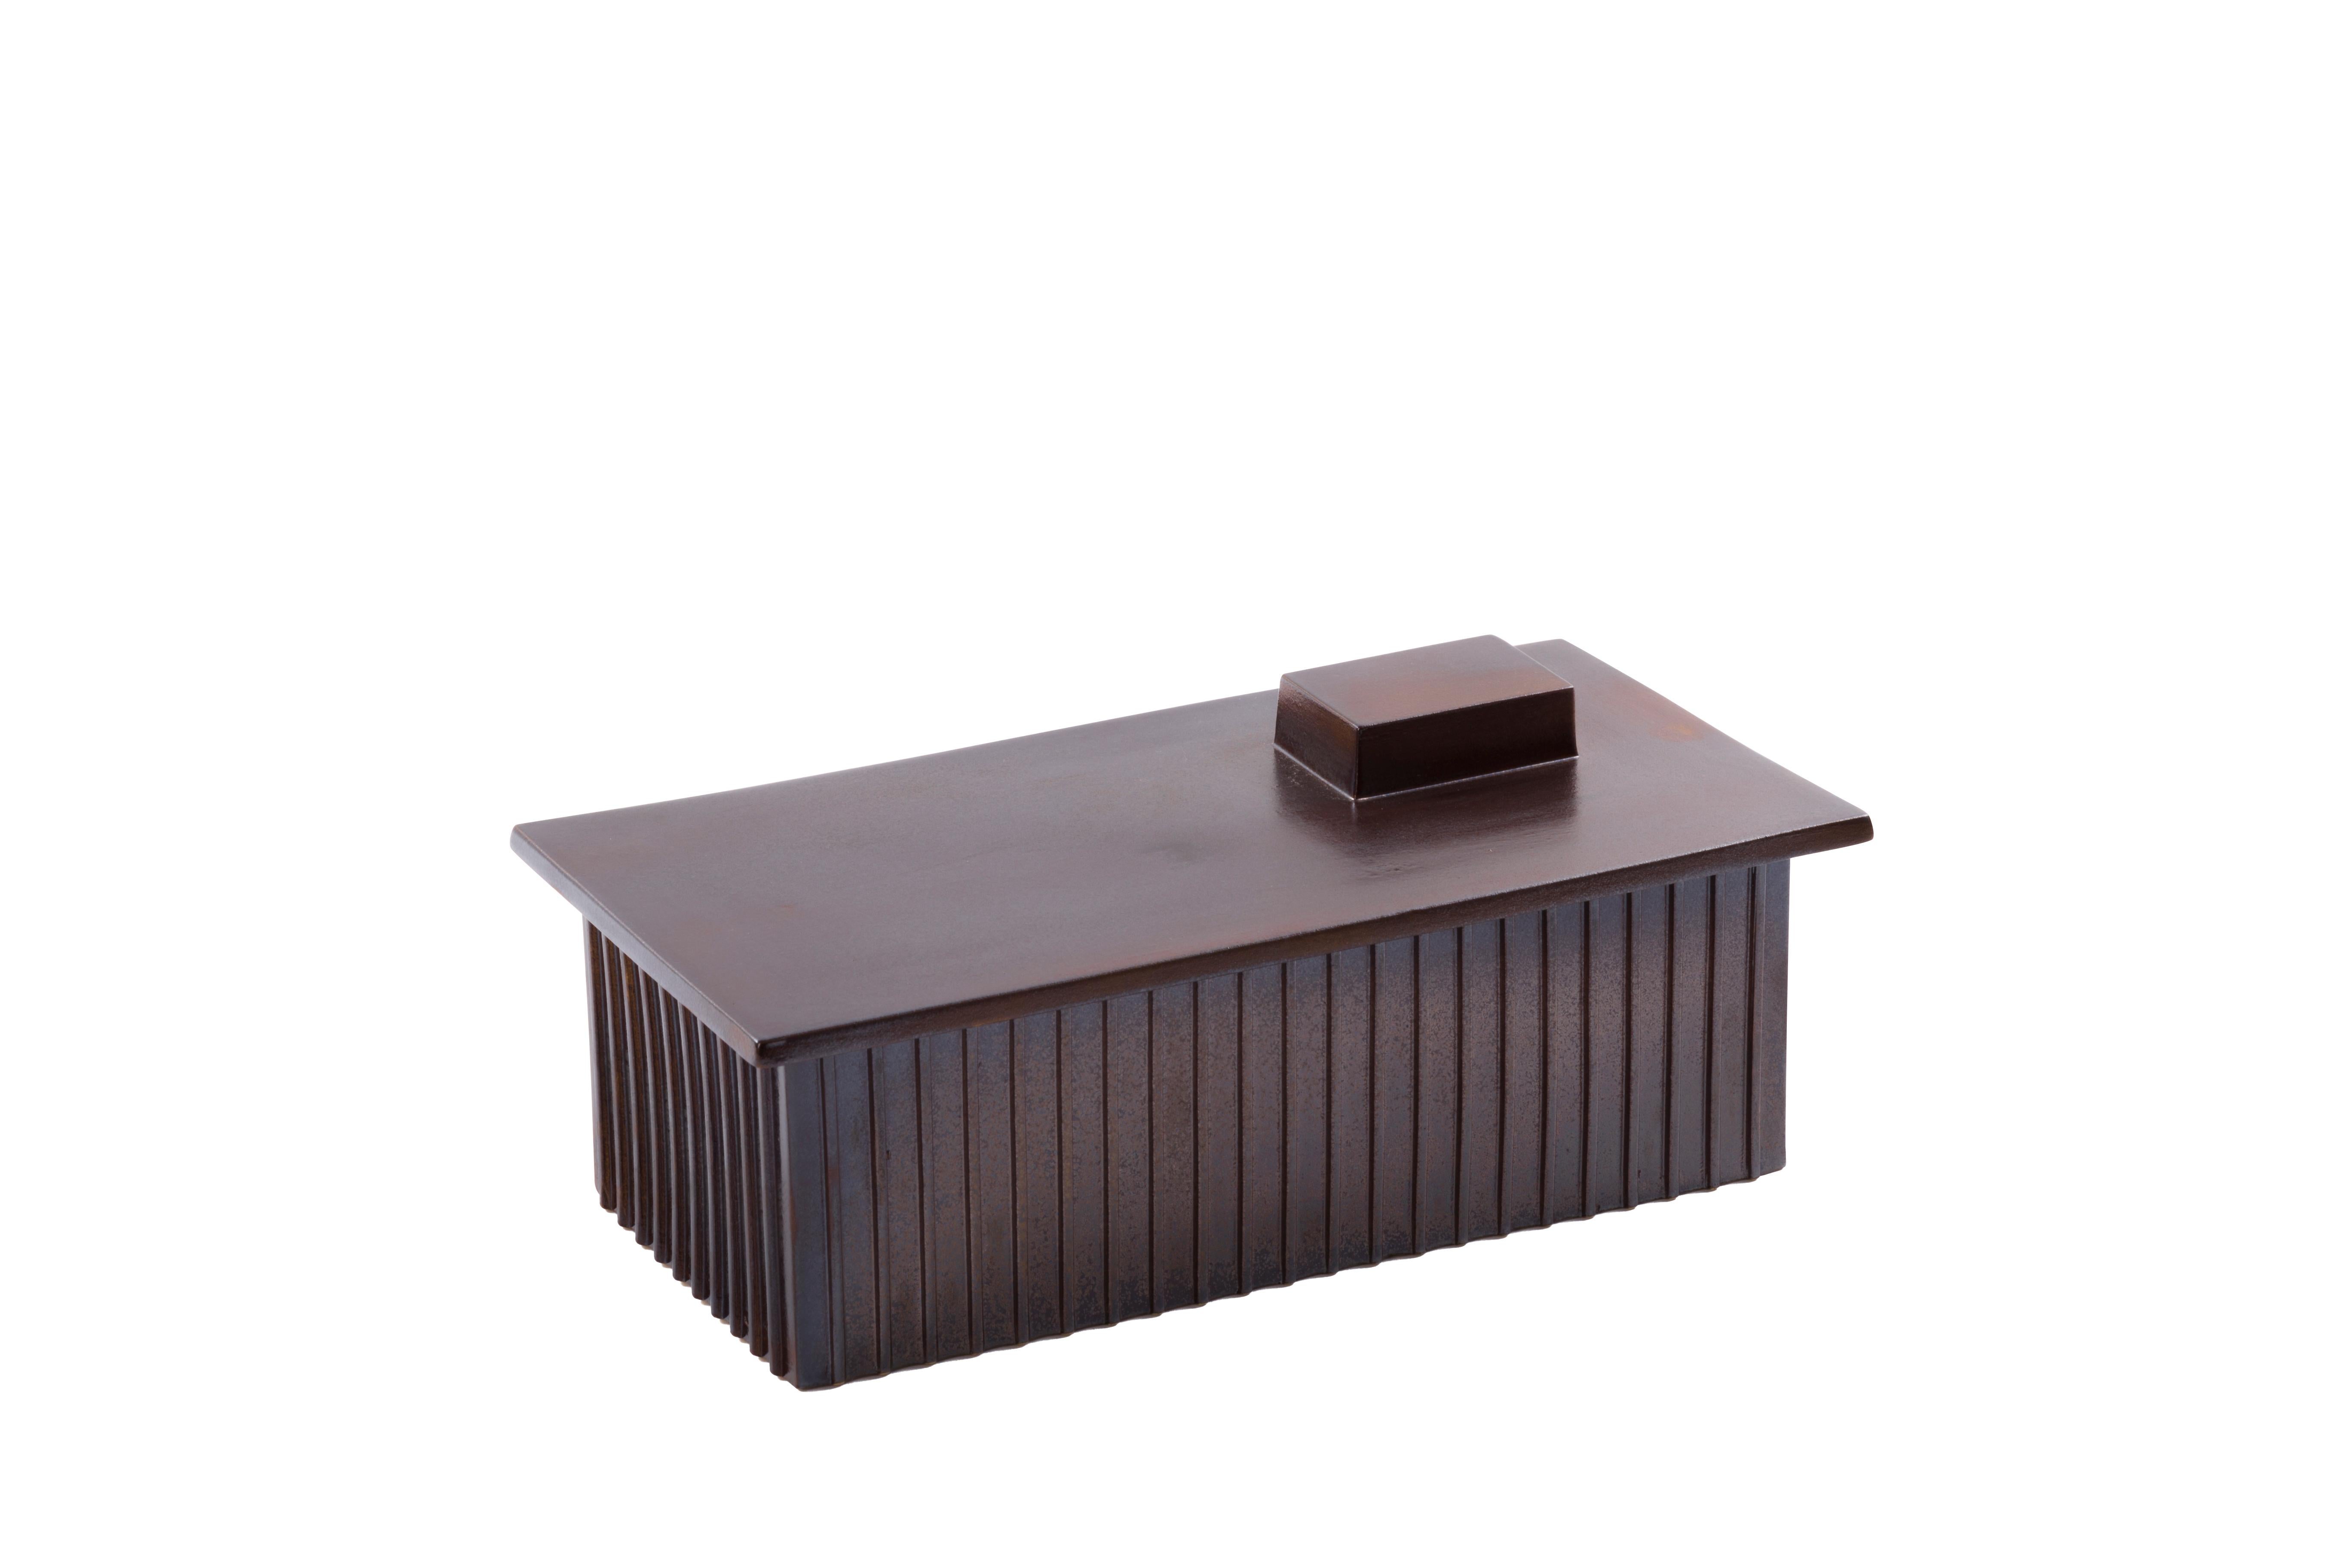 Building big metal brown box by Pulpo
Dimensions: D32.5 x W17 x H13 cm
Materials: Ceramic

Also available in different colours. 

This building boxes bring to mind the Industrial areas so familiar within our urban landscapes. An Industrial